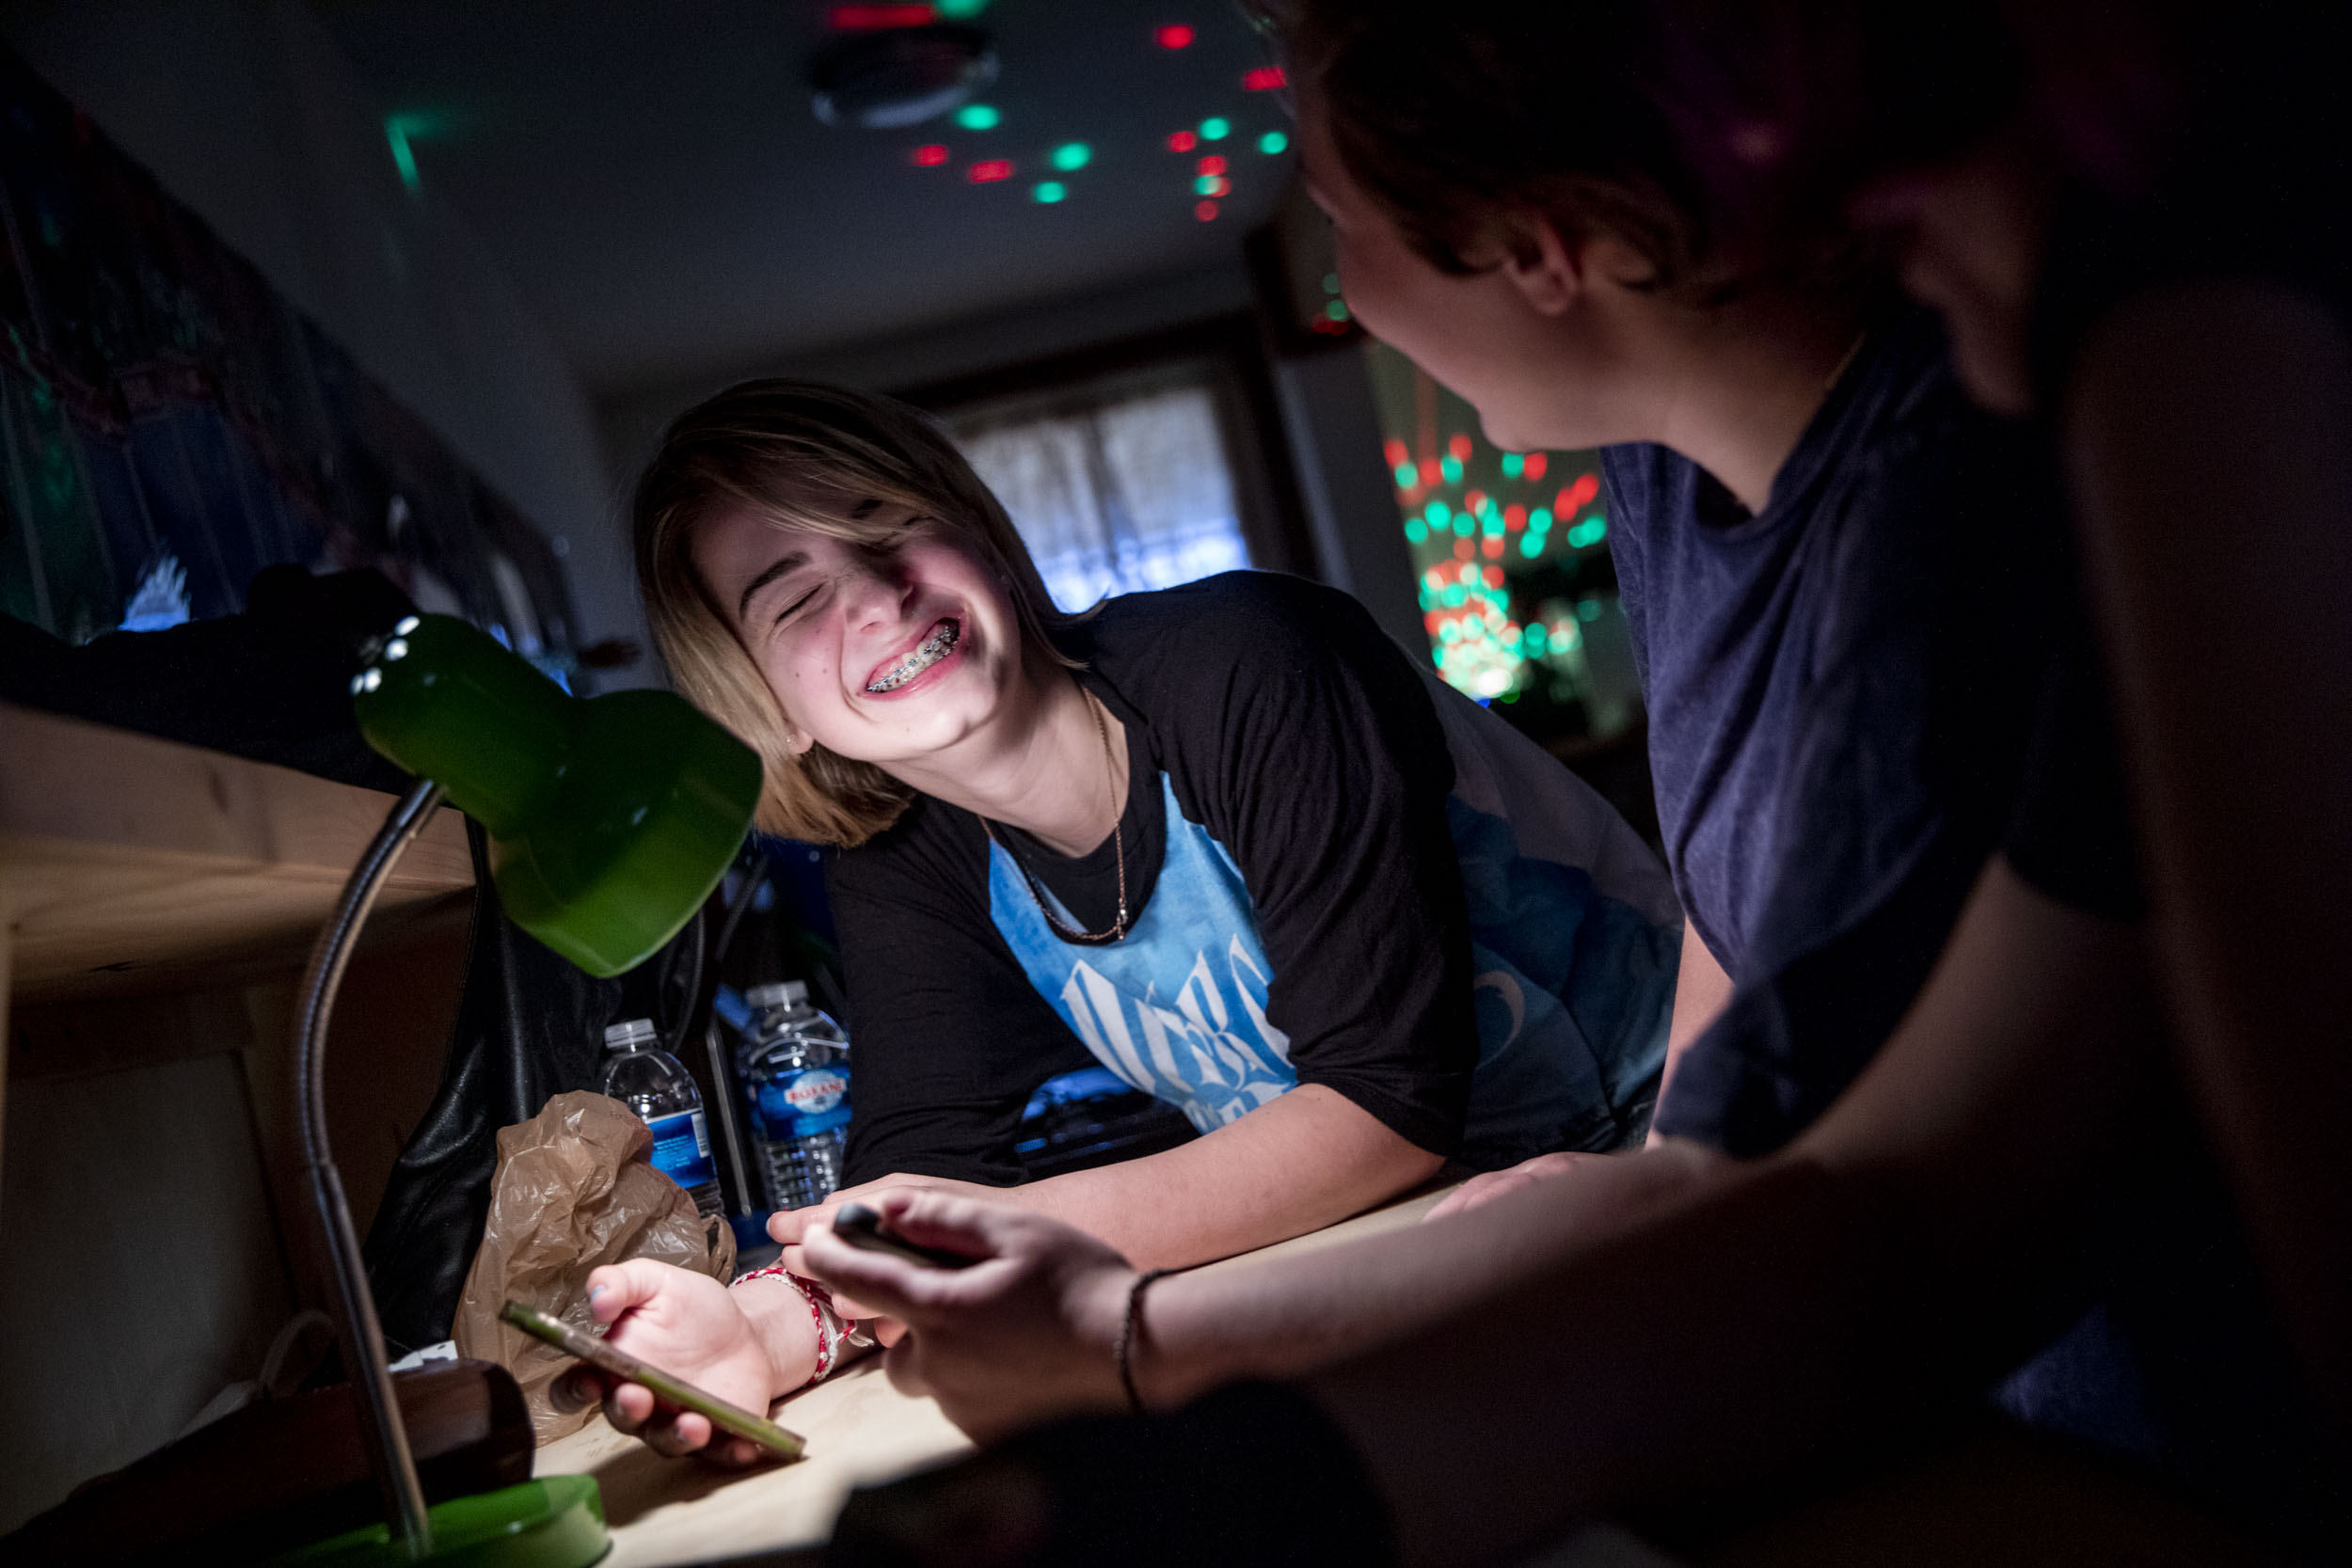 Eighth grader Brooke Benson laughs while playing on her phone during a Nerdy Girls meetup in Ellensburg on May 17, 2019. (Photo by Dorothy Edwards/Crosscut)